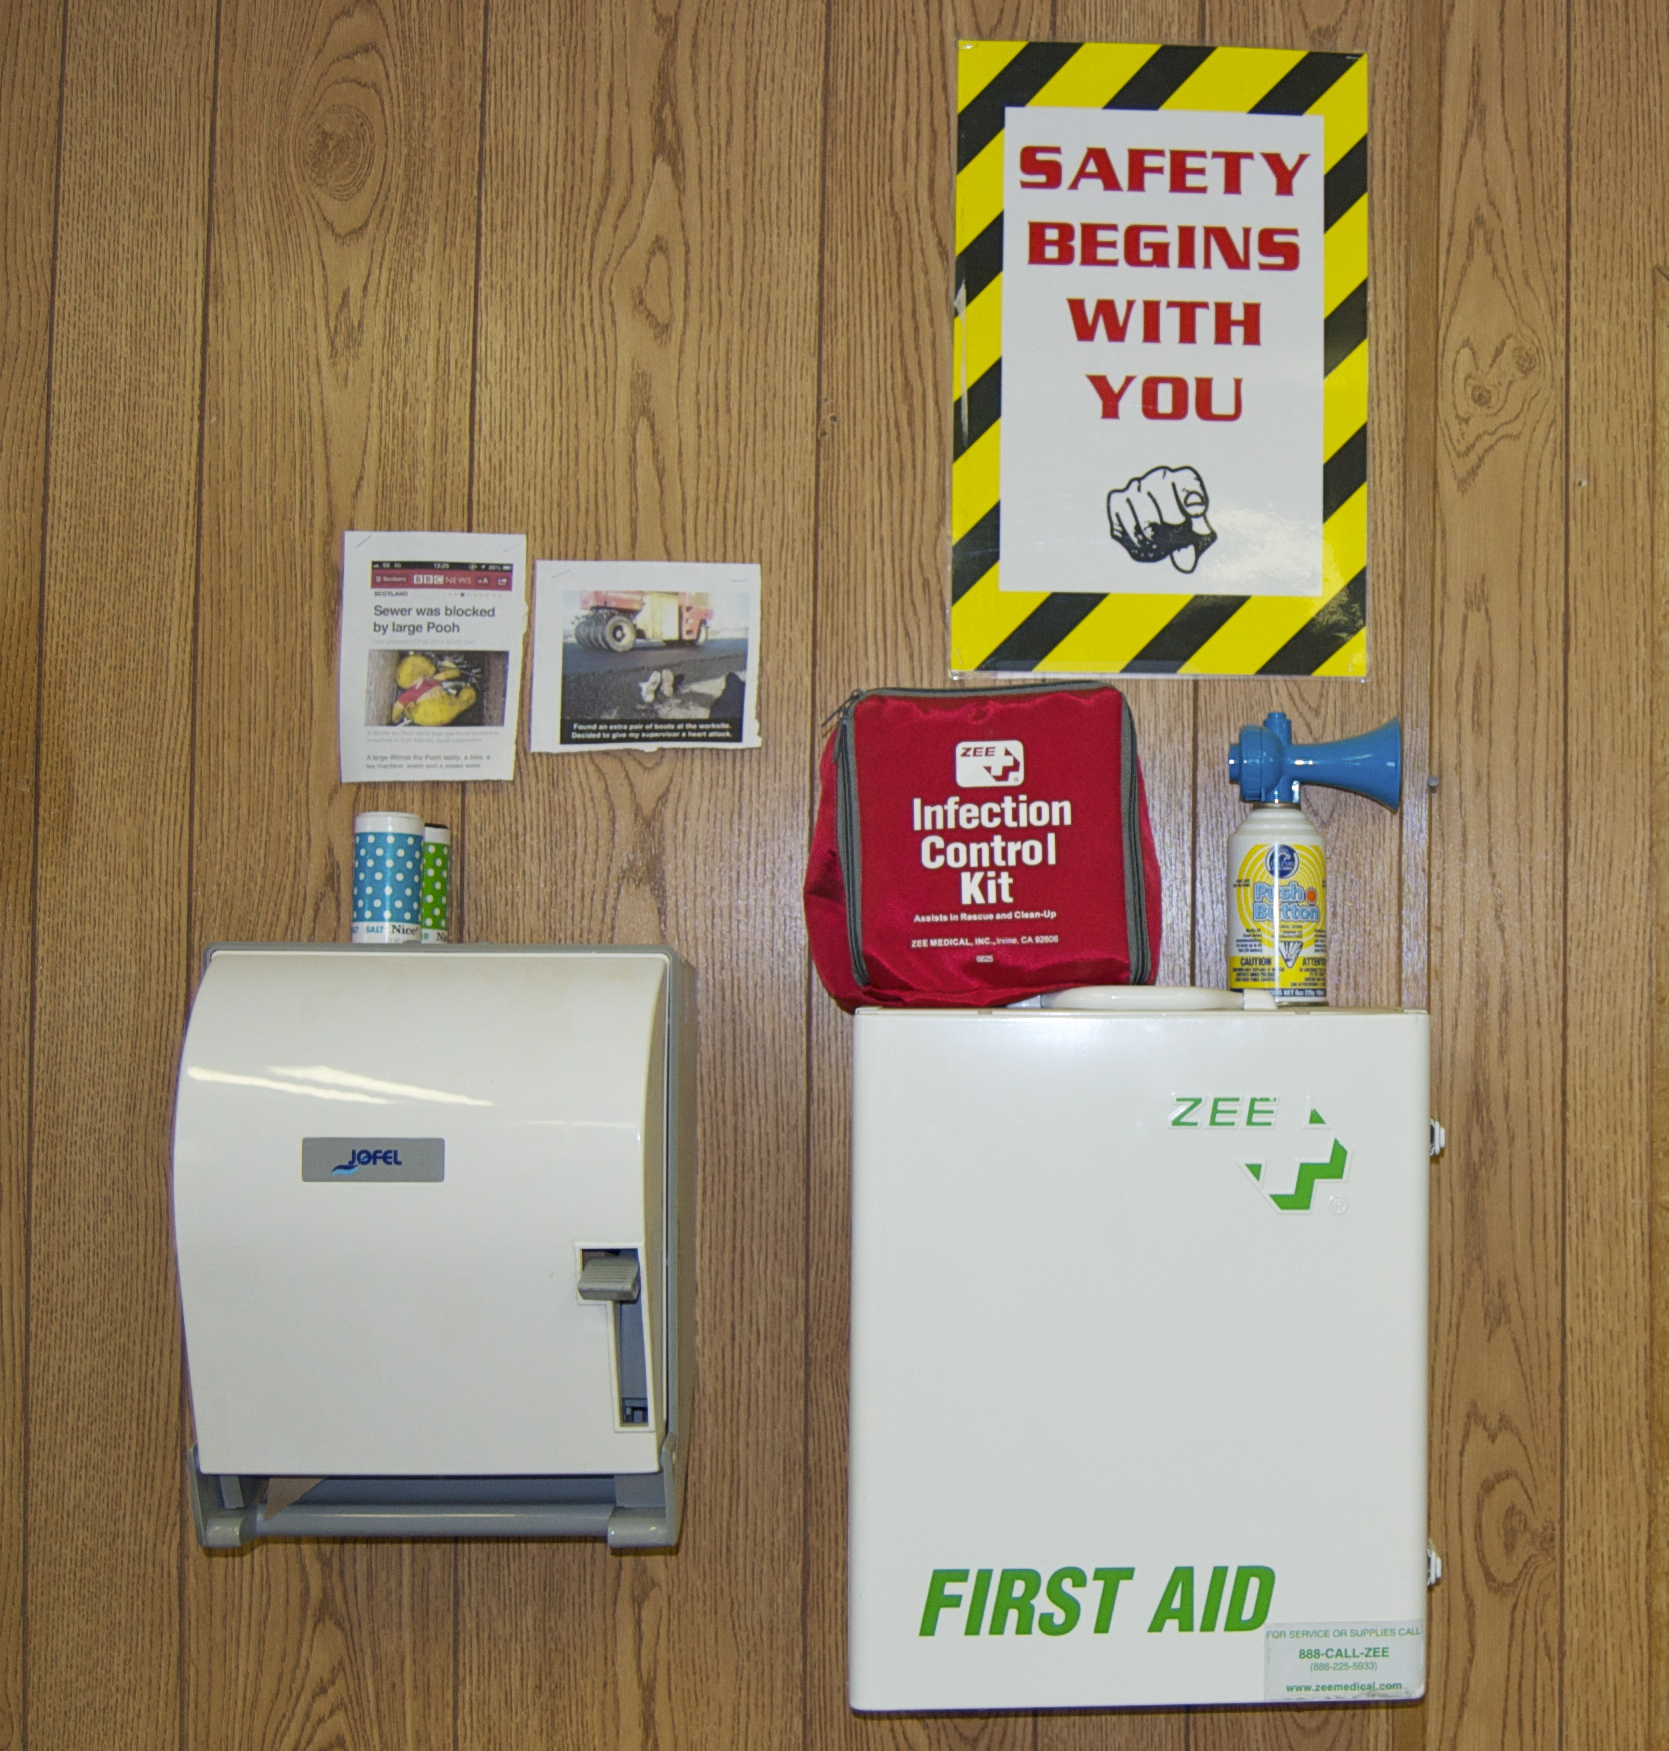 First aid kit, infection control kit and airhorn